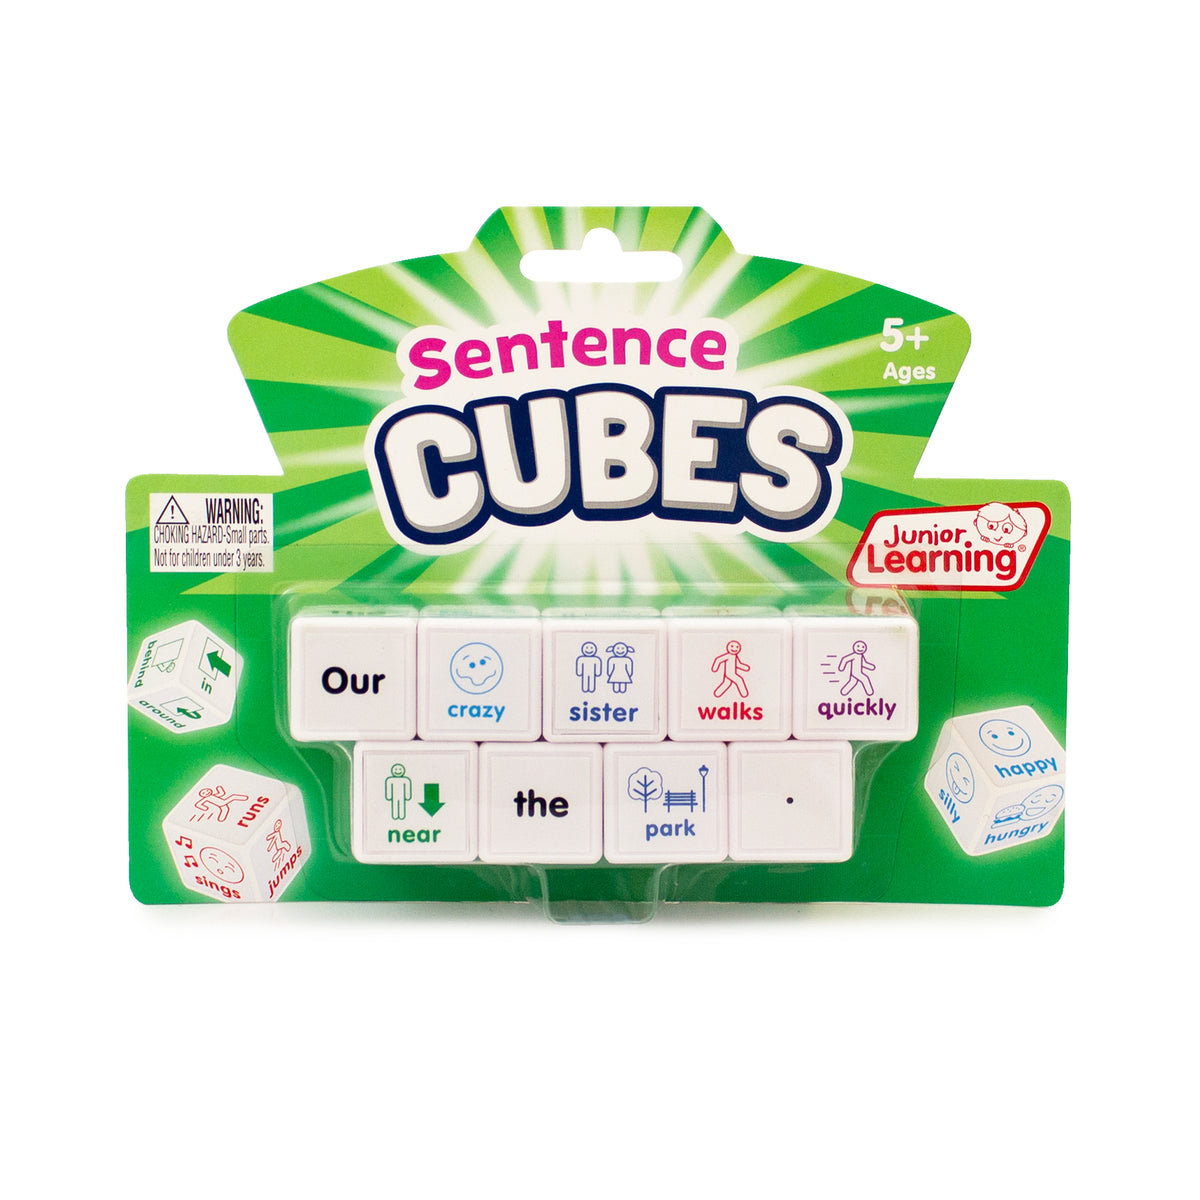 Junior Learning JL644 Sentence Cubes packaging faced front